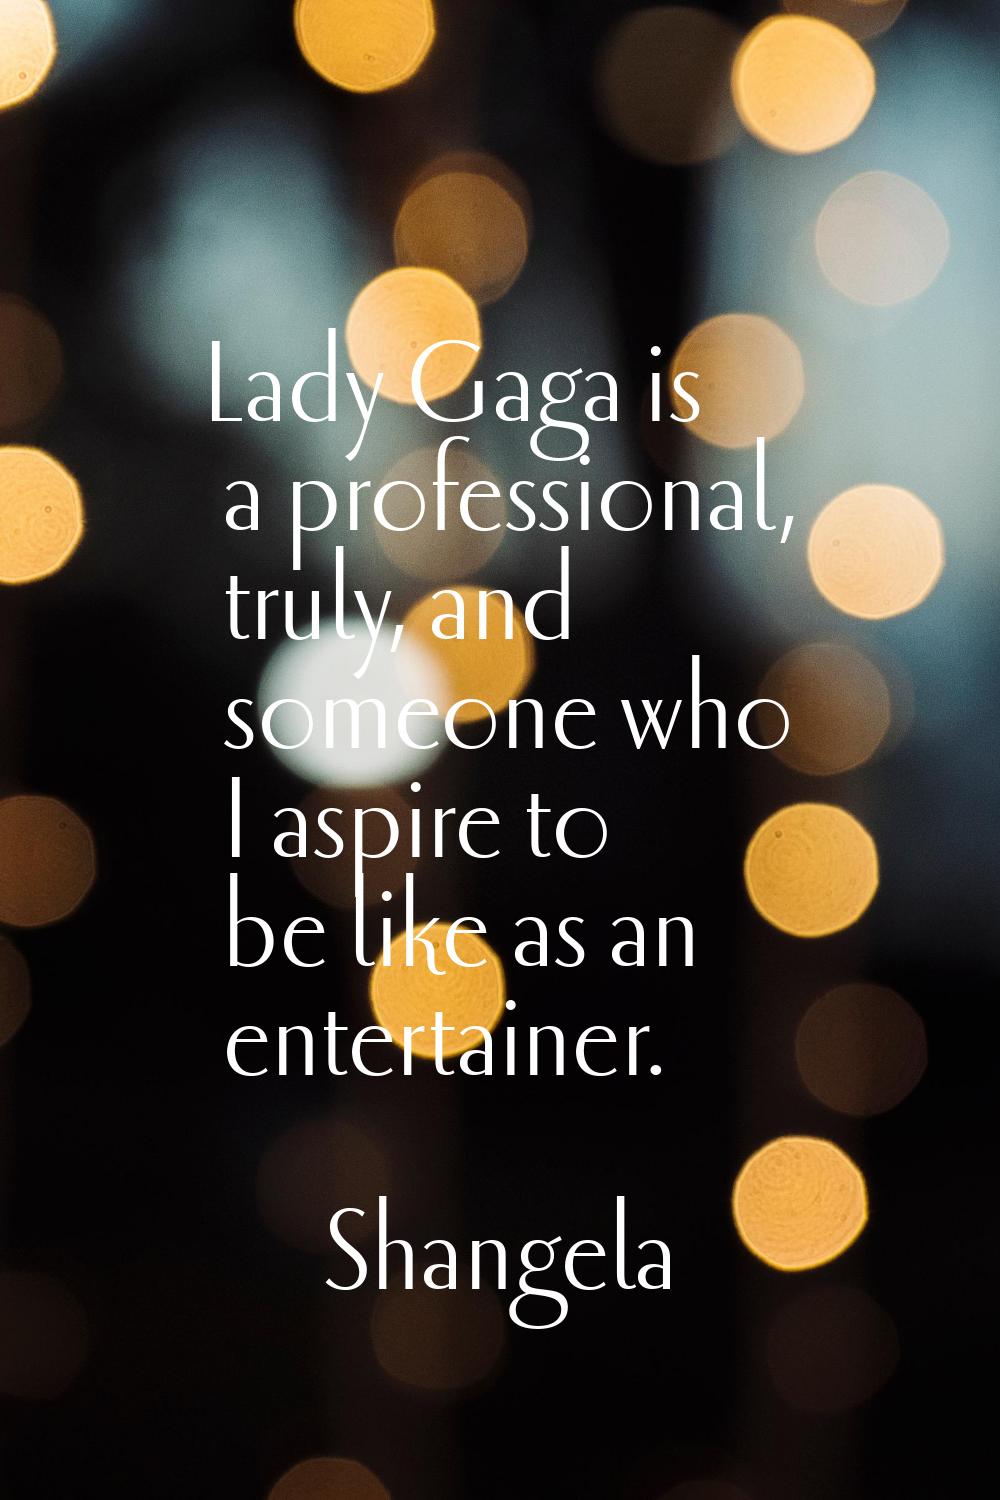 Lady Gaga is a professional, truly, and someone who I aspire to be like as an entertainer.